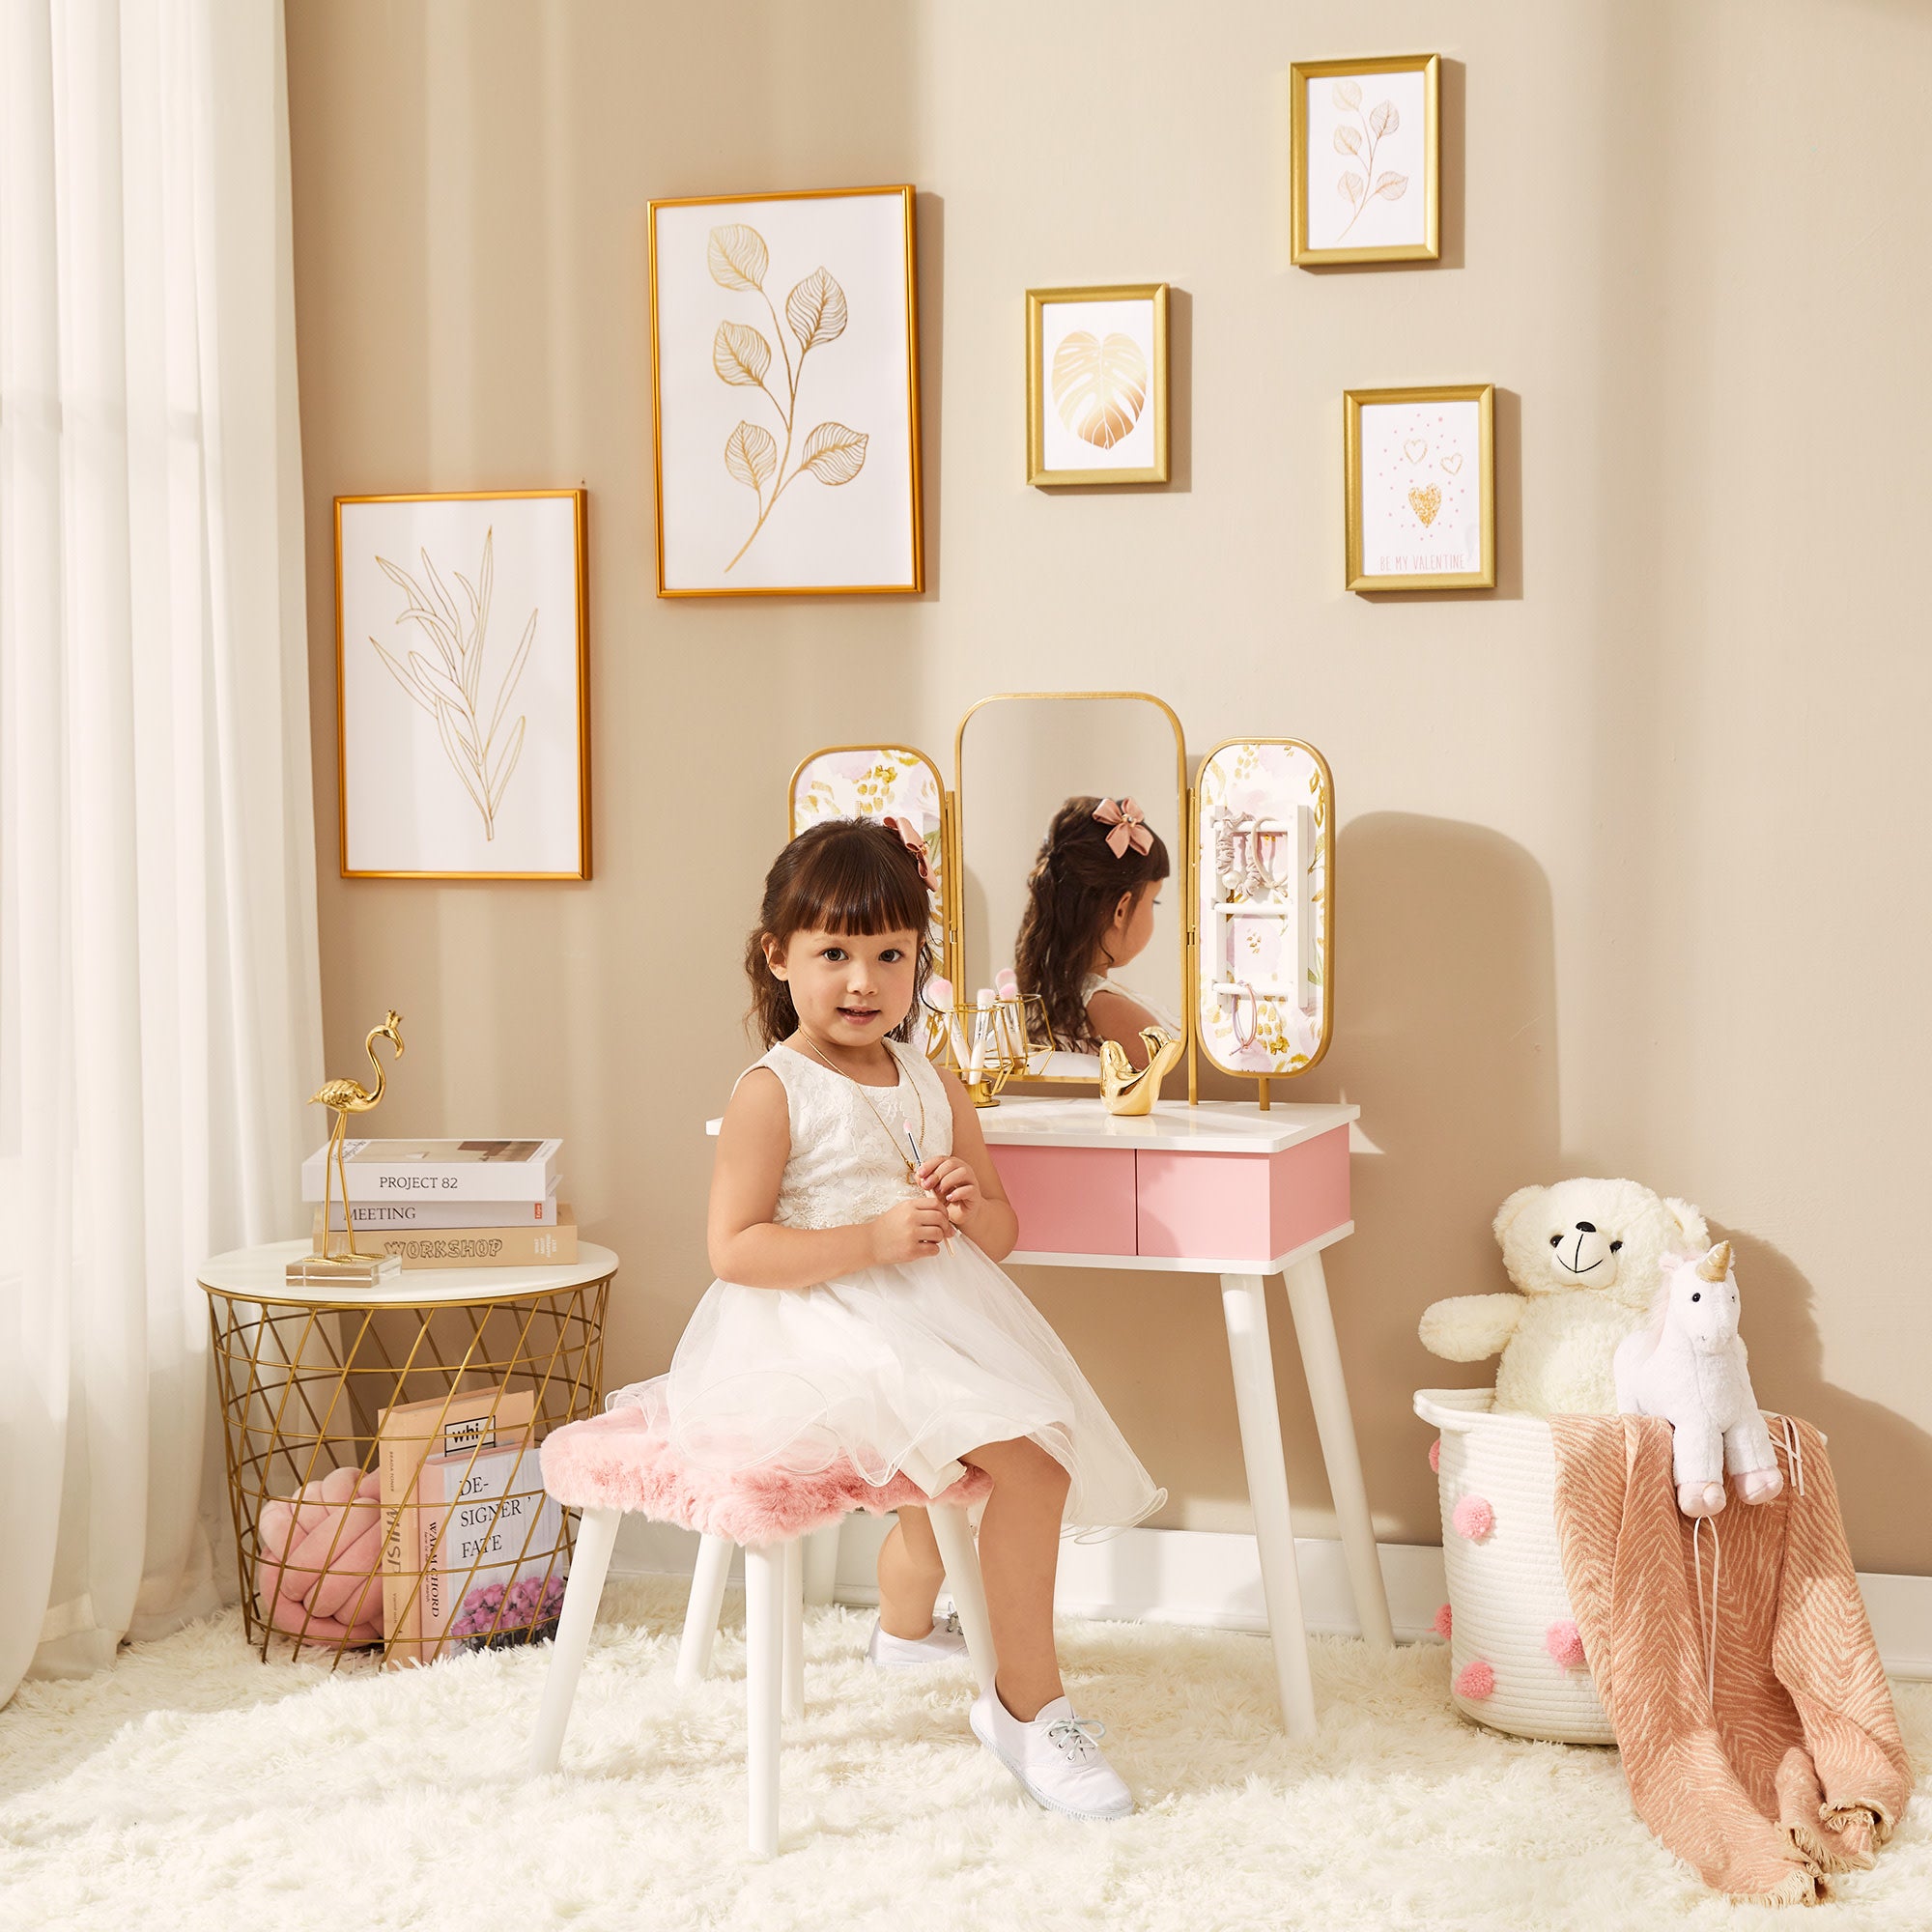 Fantasy Fields Little Lady Izabel Medium Floral Play Vanity Set with Matching Stool & Removable Faux Fur Cover, Floral Printed Panels, & Storage Drawer, White/Pink